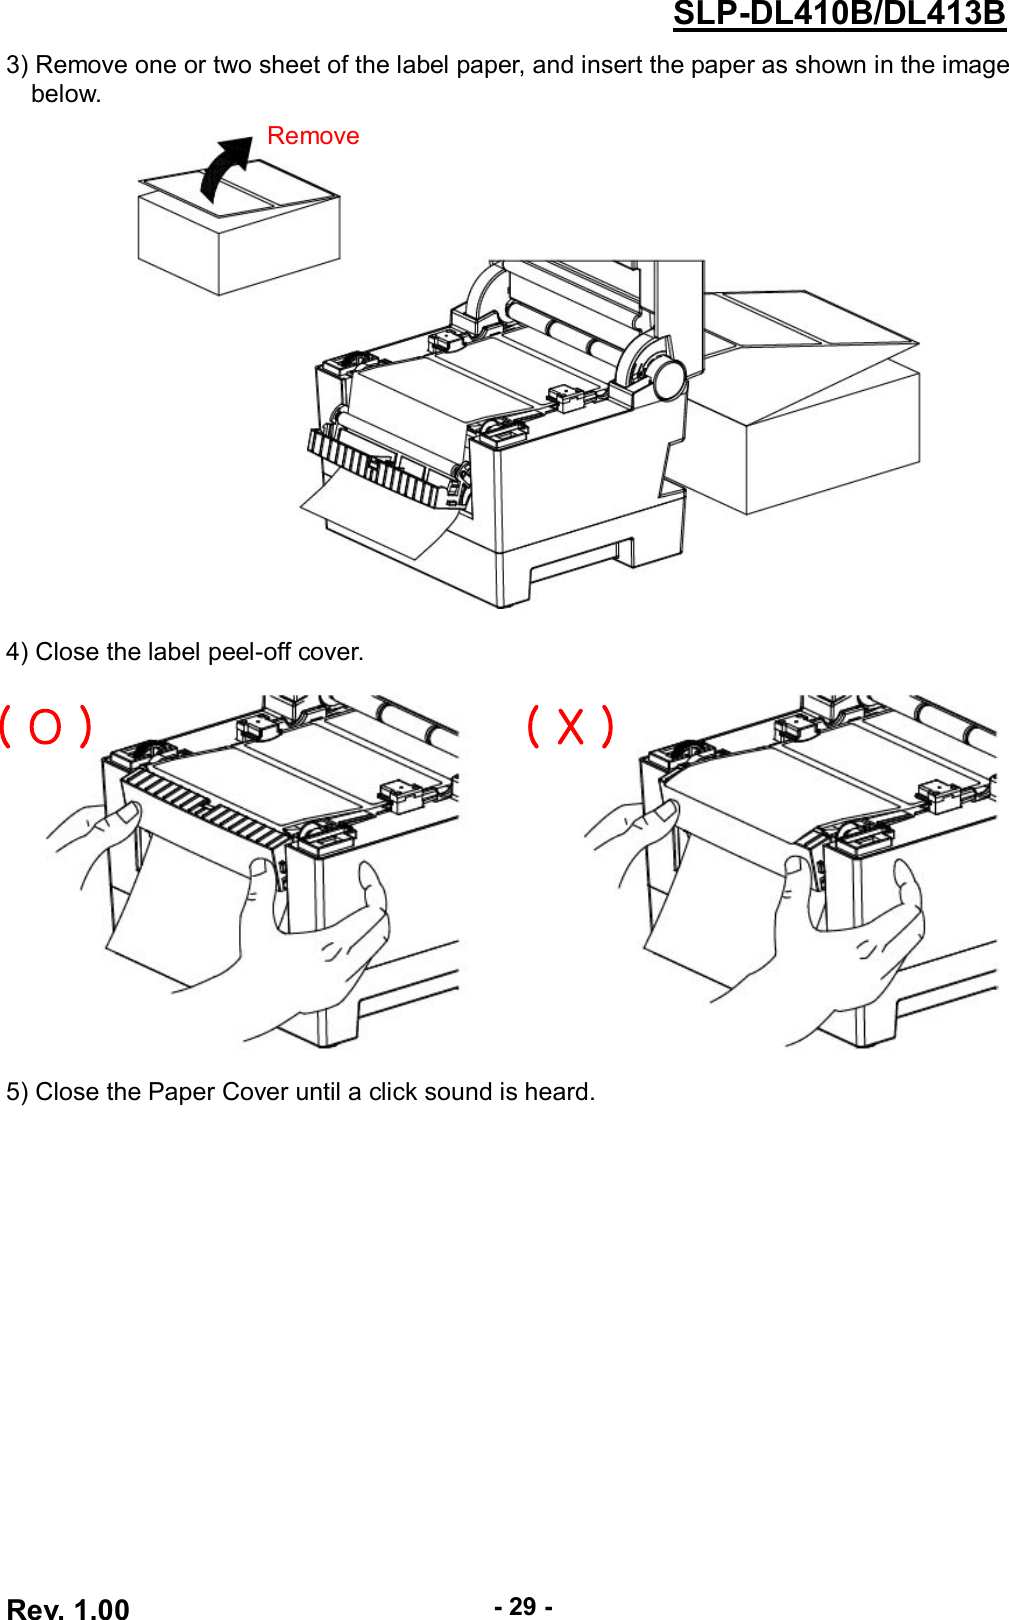  Rev. 1.00 - 29 - SLP-DL410B/DL413B 3) Remove one or two sheet of the label paper, and insert the paper as shown in the image below.      4) Close the label peel-off cover.    5) Close the Paper Cover until a click sound is heard.  Remove( O ) ( X ) 